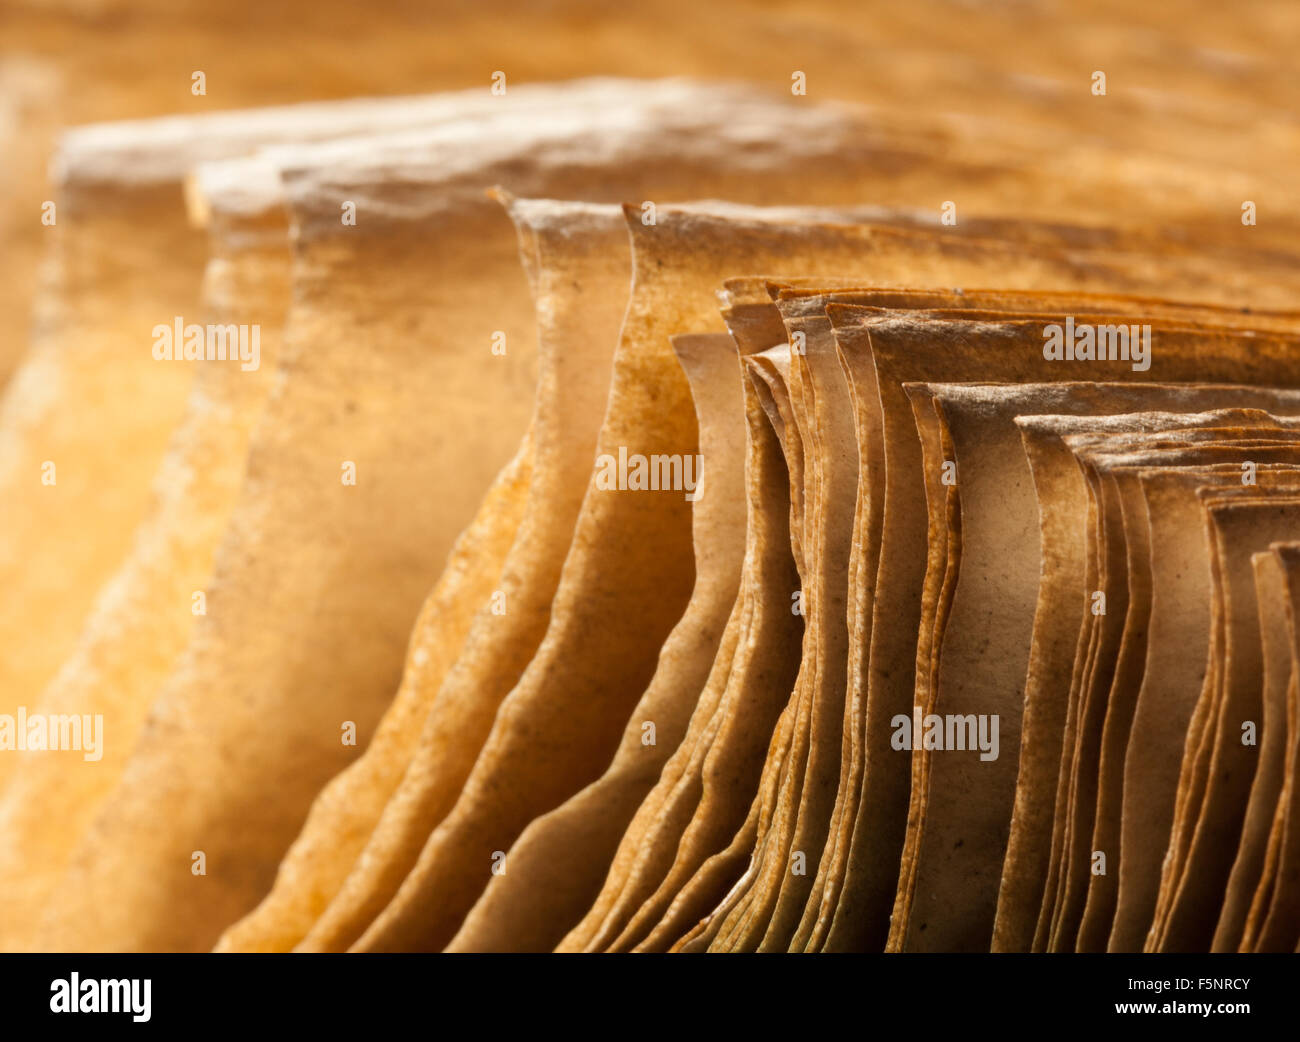 Pages of open ancient book. Close-up view Stock Photo